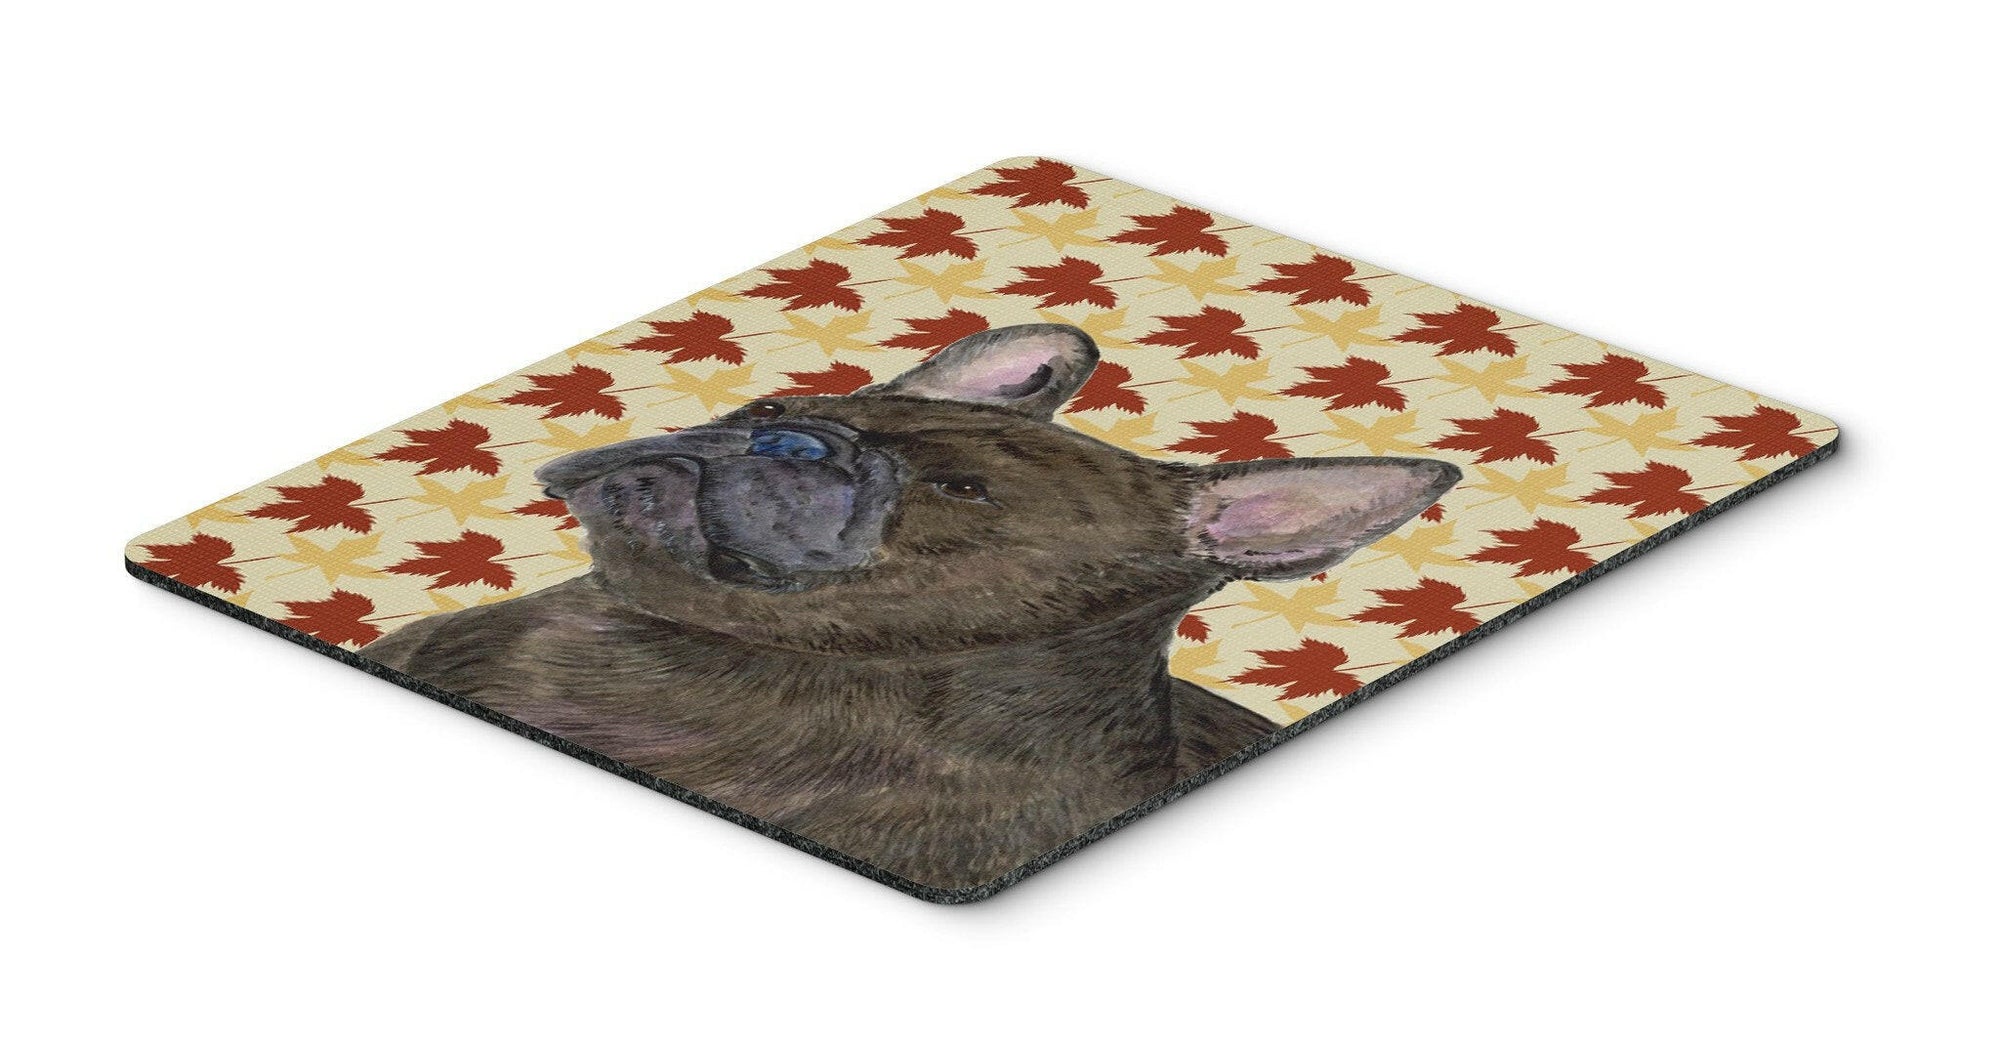 French Bulldog Fall Leaves Portrait Mouse Pad, Hot Pad or Trivet by Caroline's Treasures